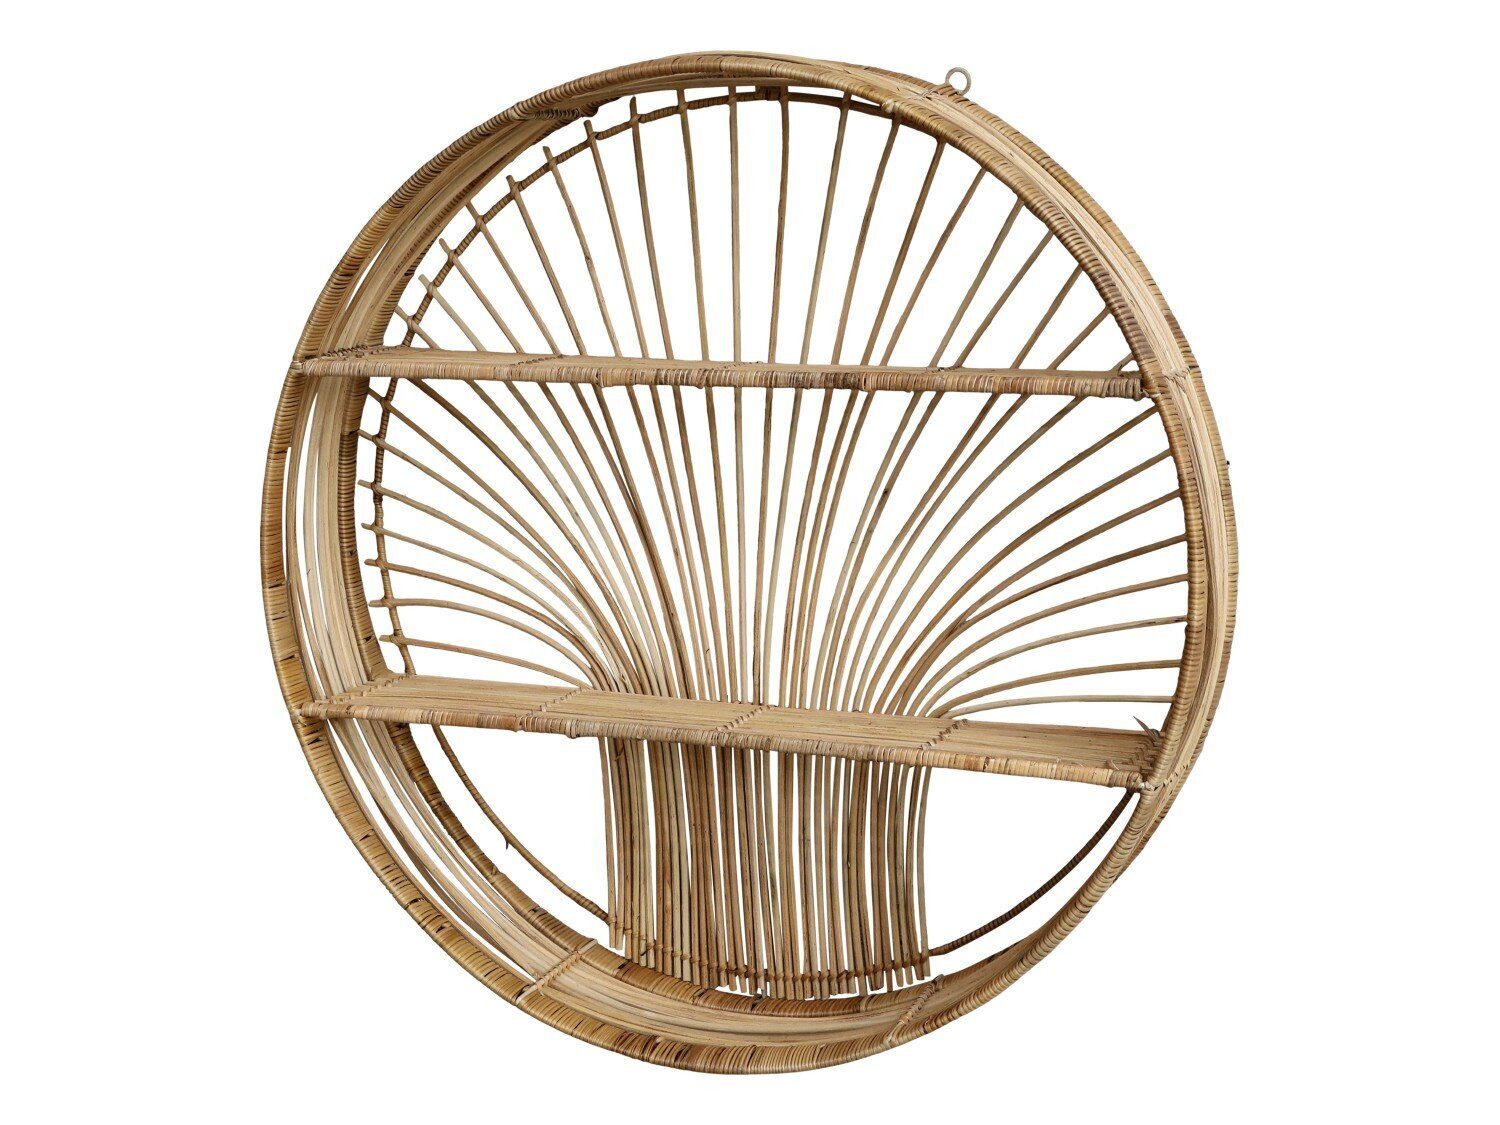 Chic Antique Wandregal Muster Rattan